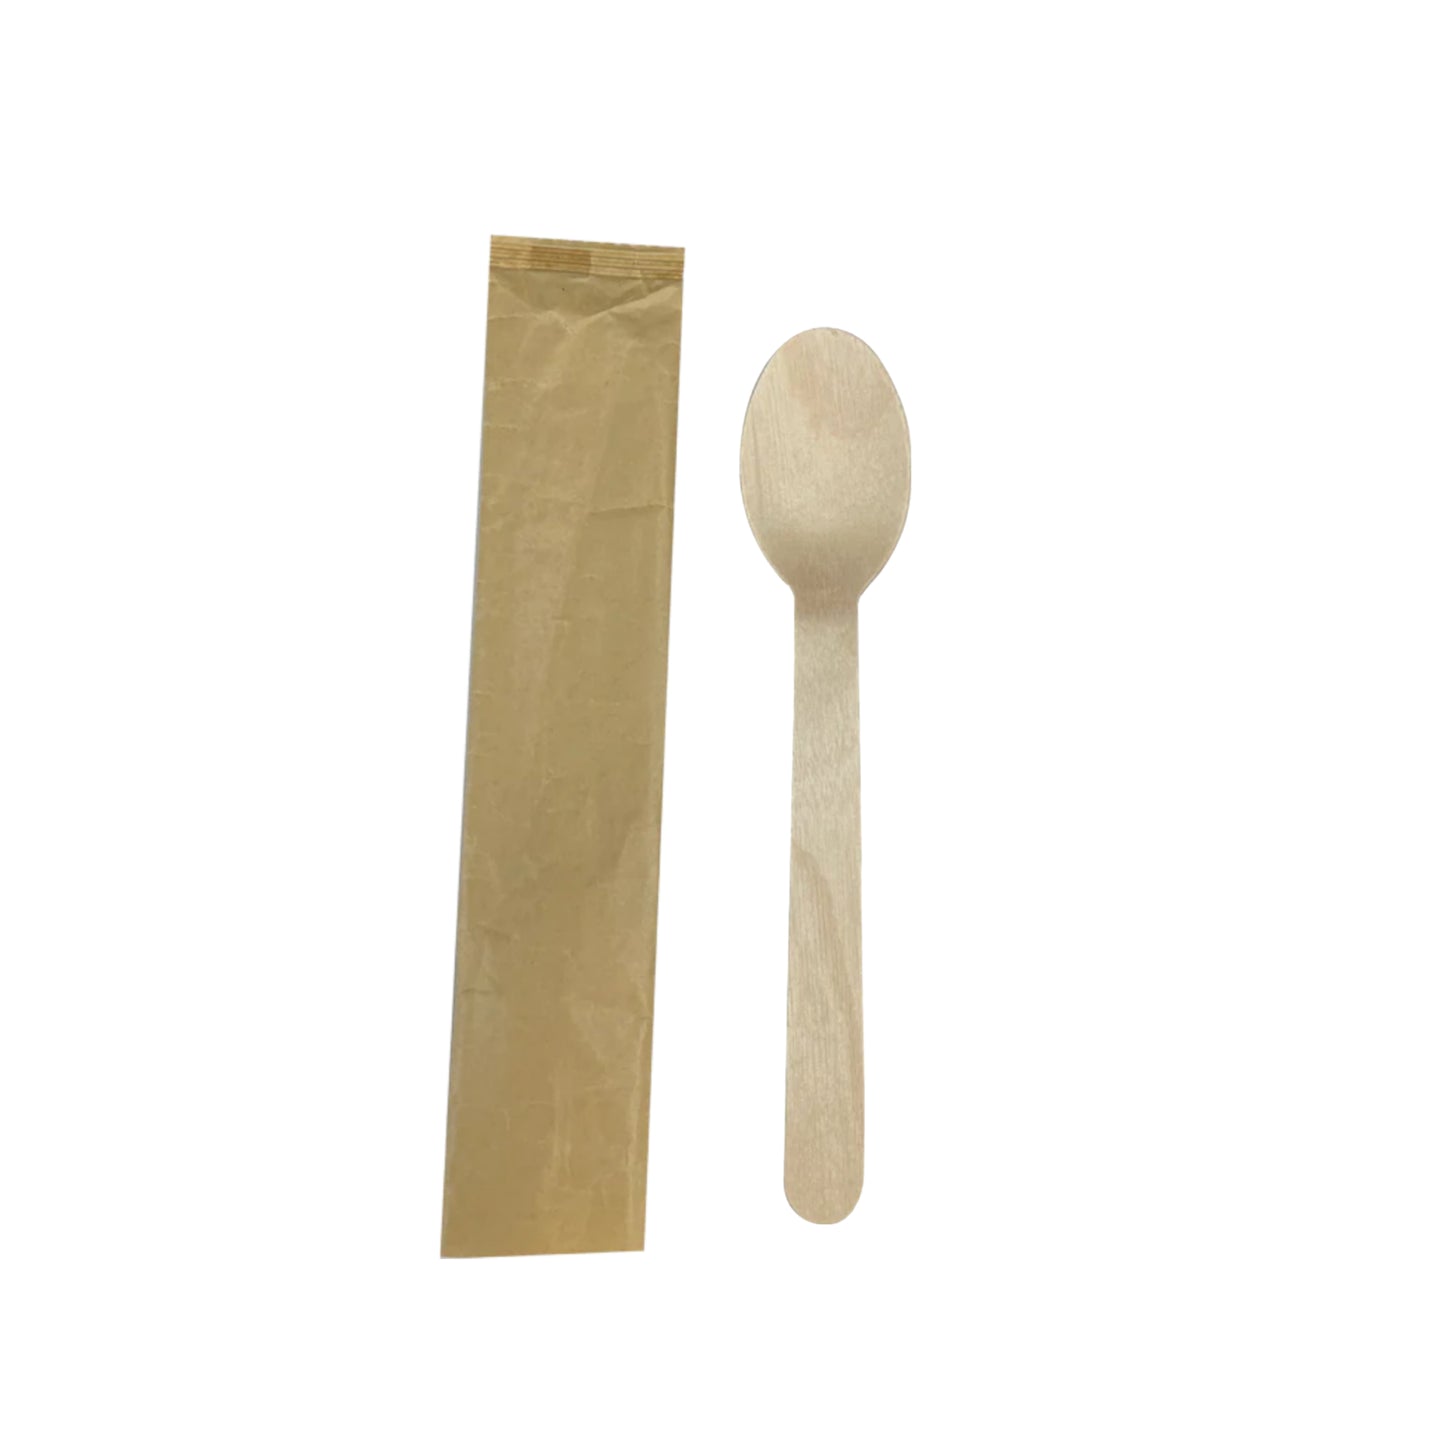 KIS-IR160SG | Wooden Spoon with Paper Wrapped; $0.044/pc